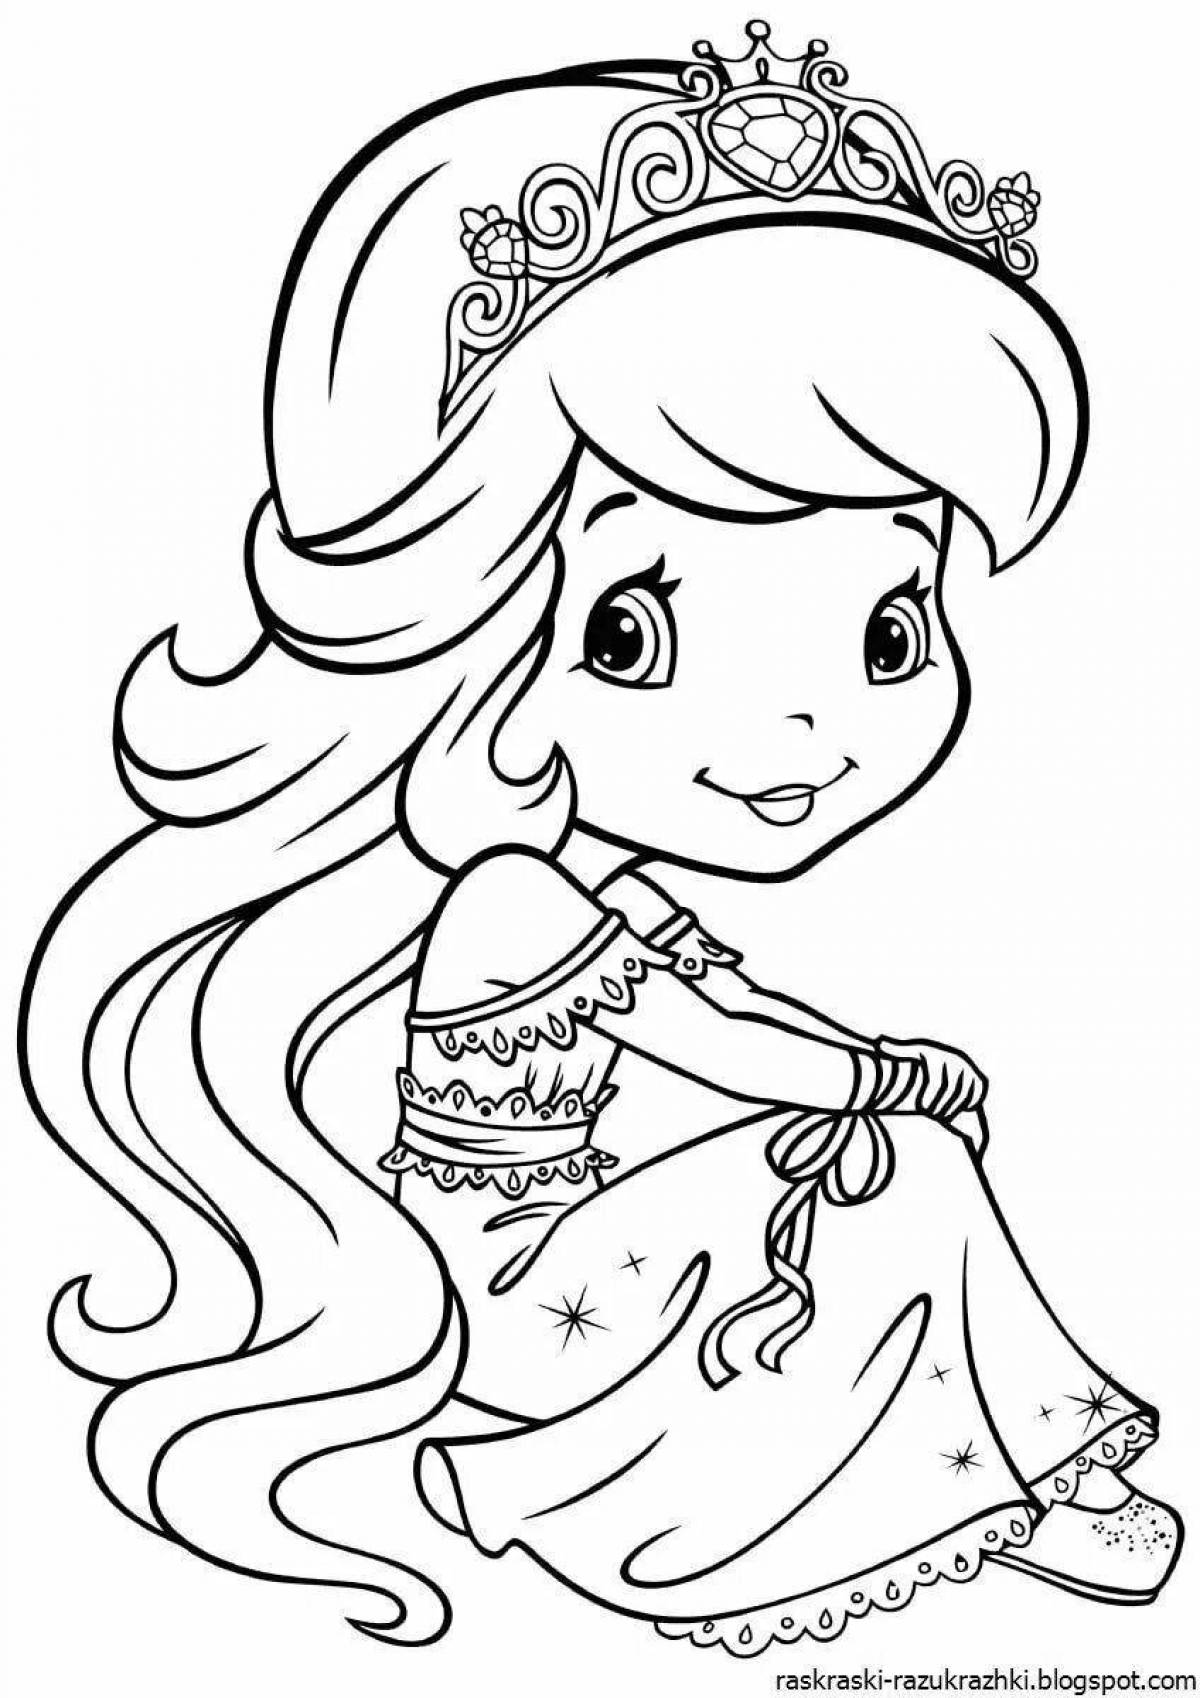 Exquisite coloring book for 3-4 year old princess girls